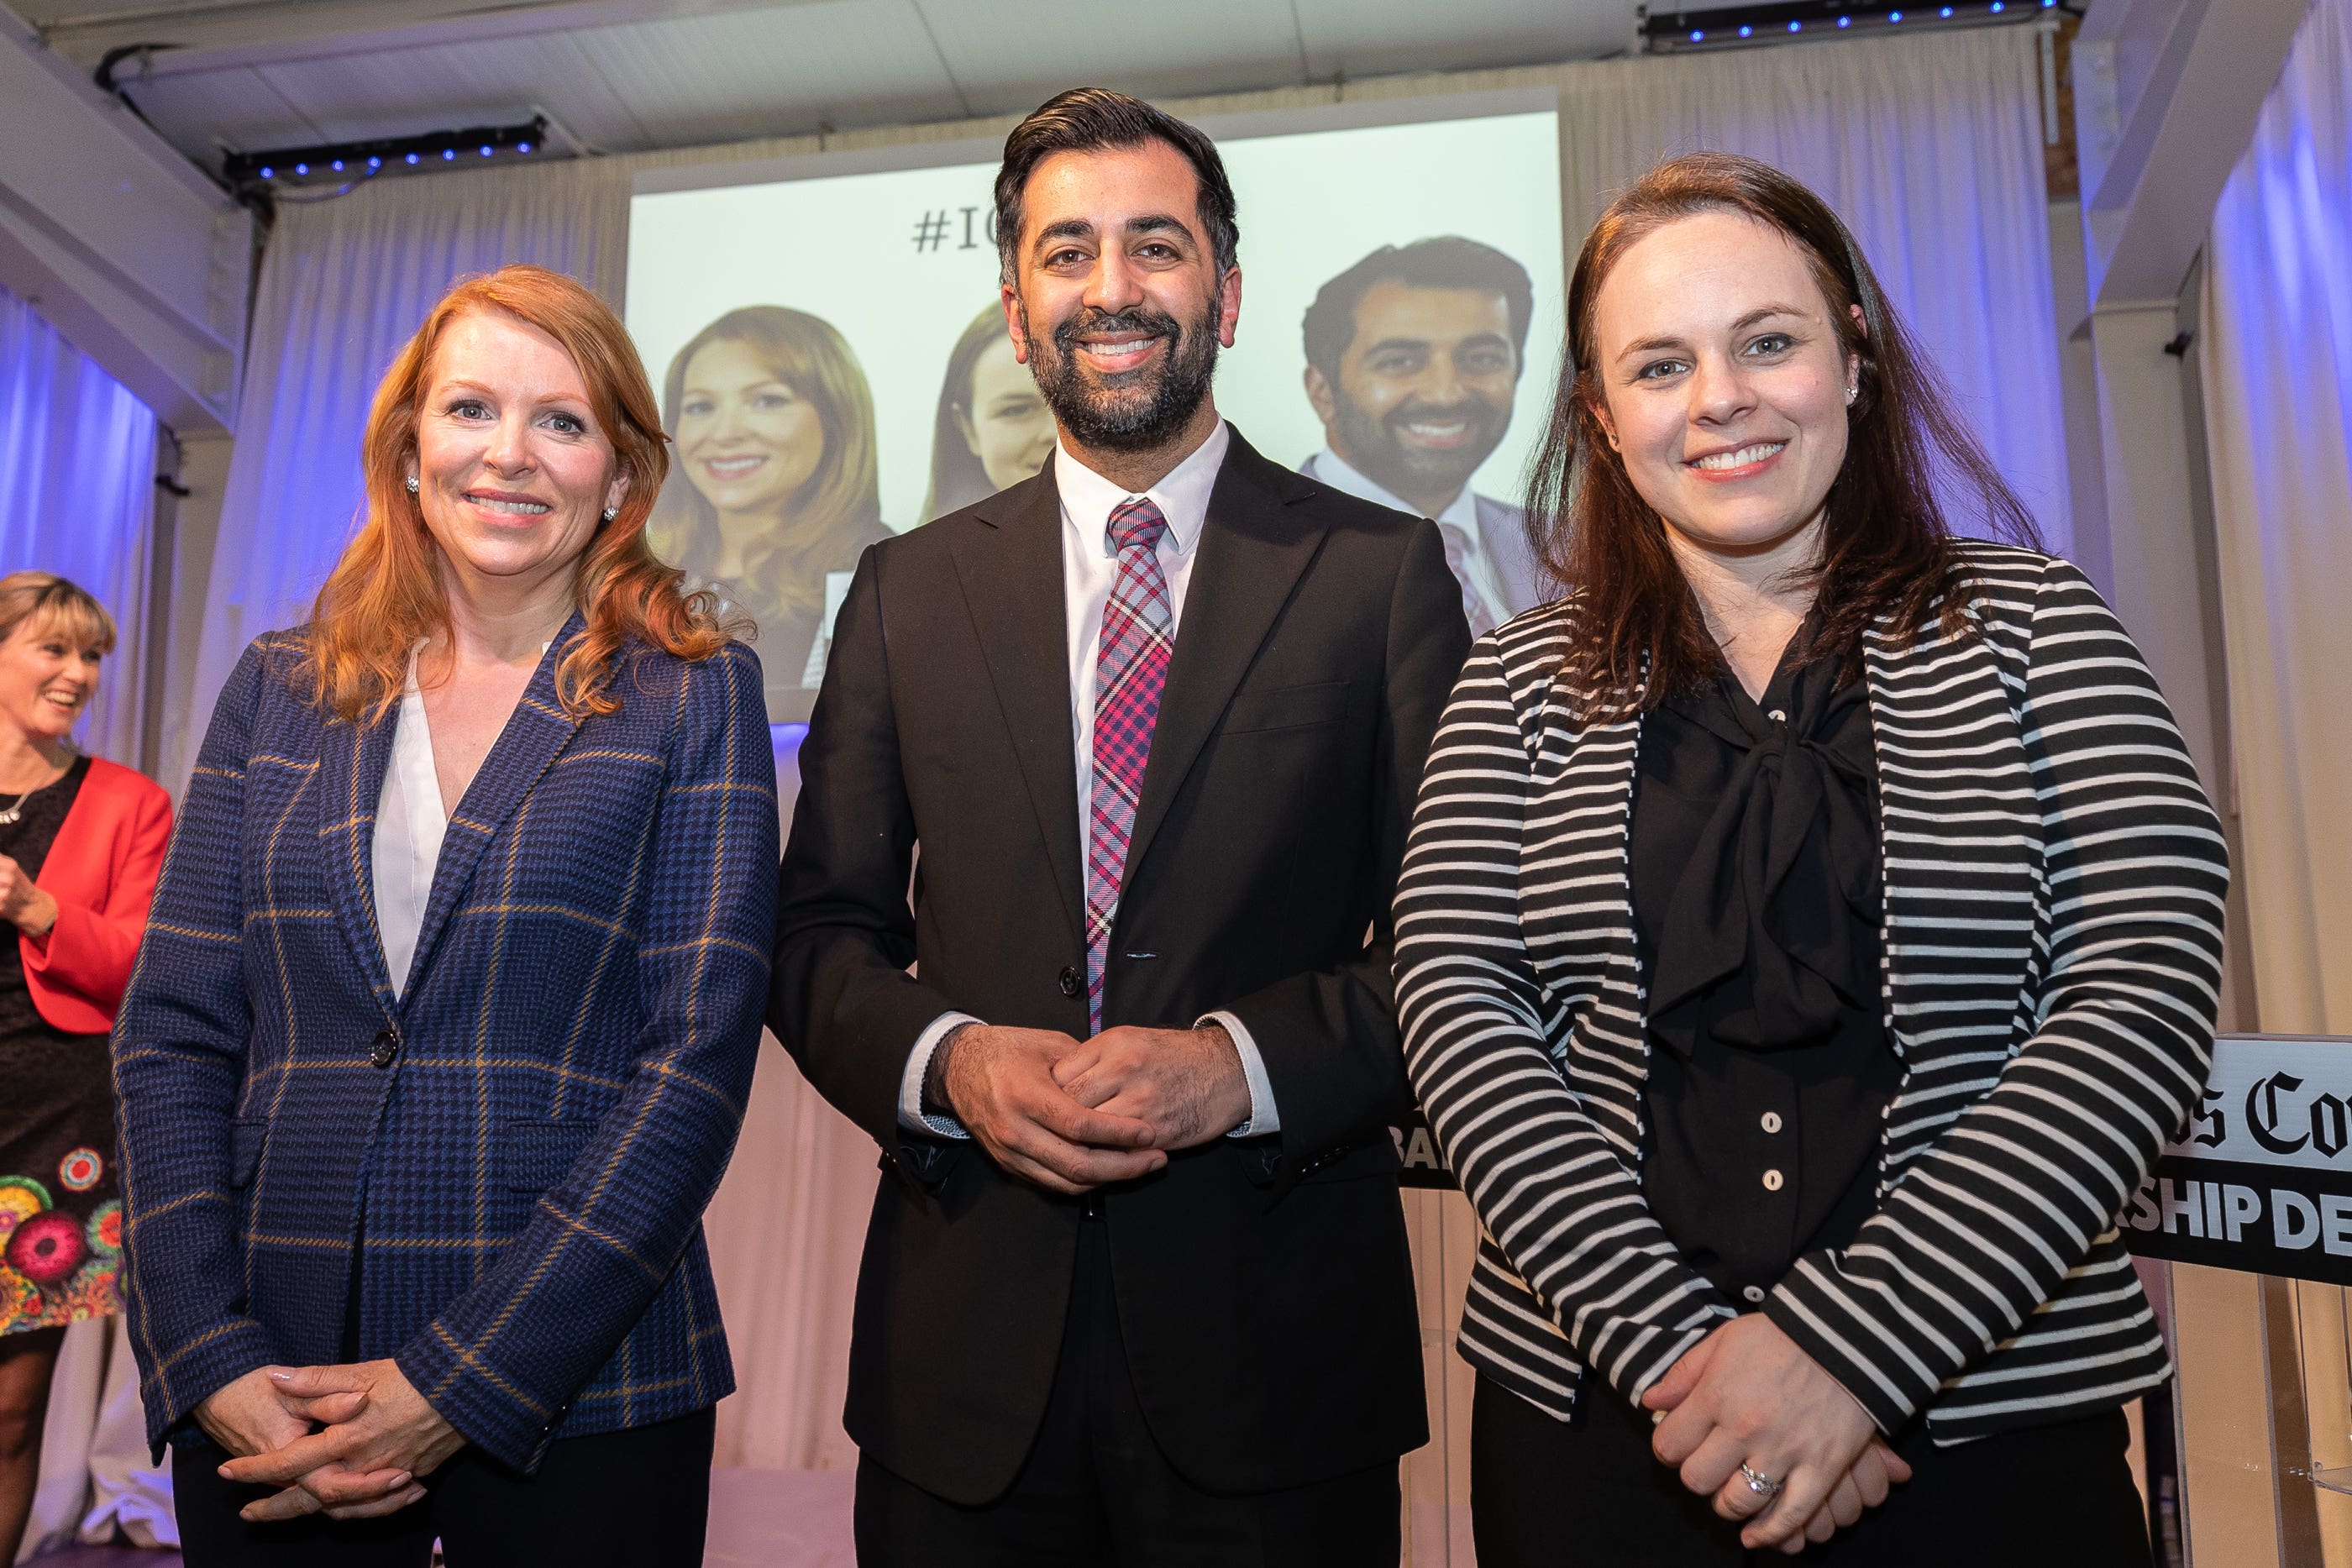 Ash Regan, Humza Yousaf and Kate Forbes were the final candidates